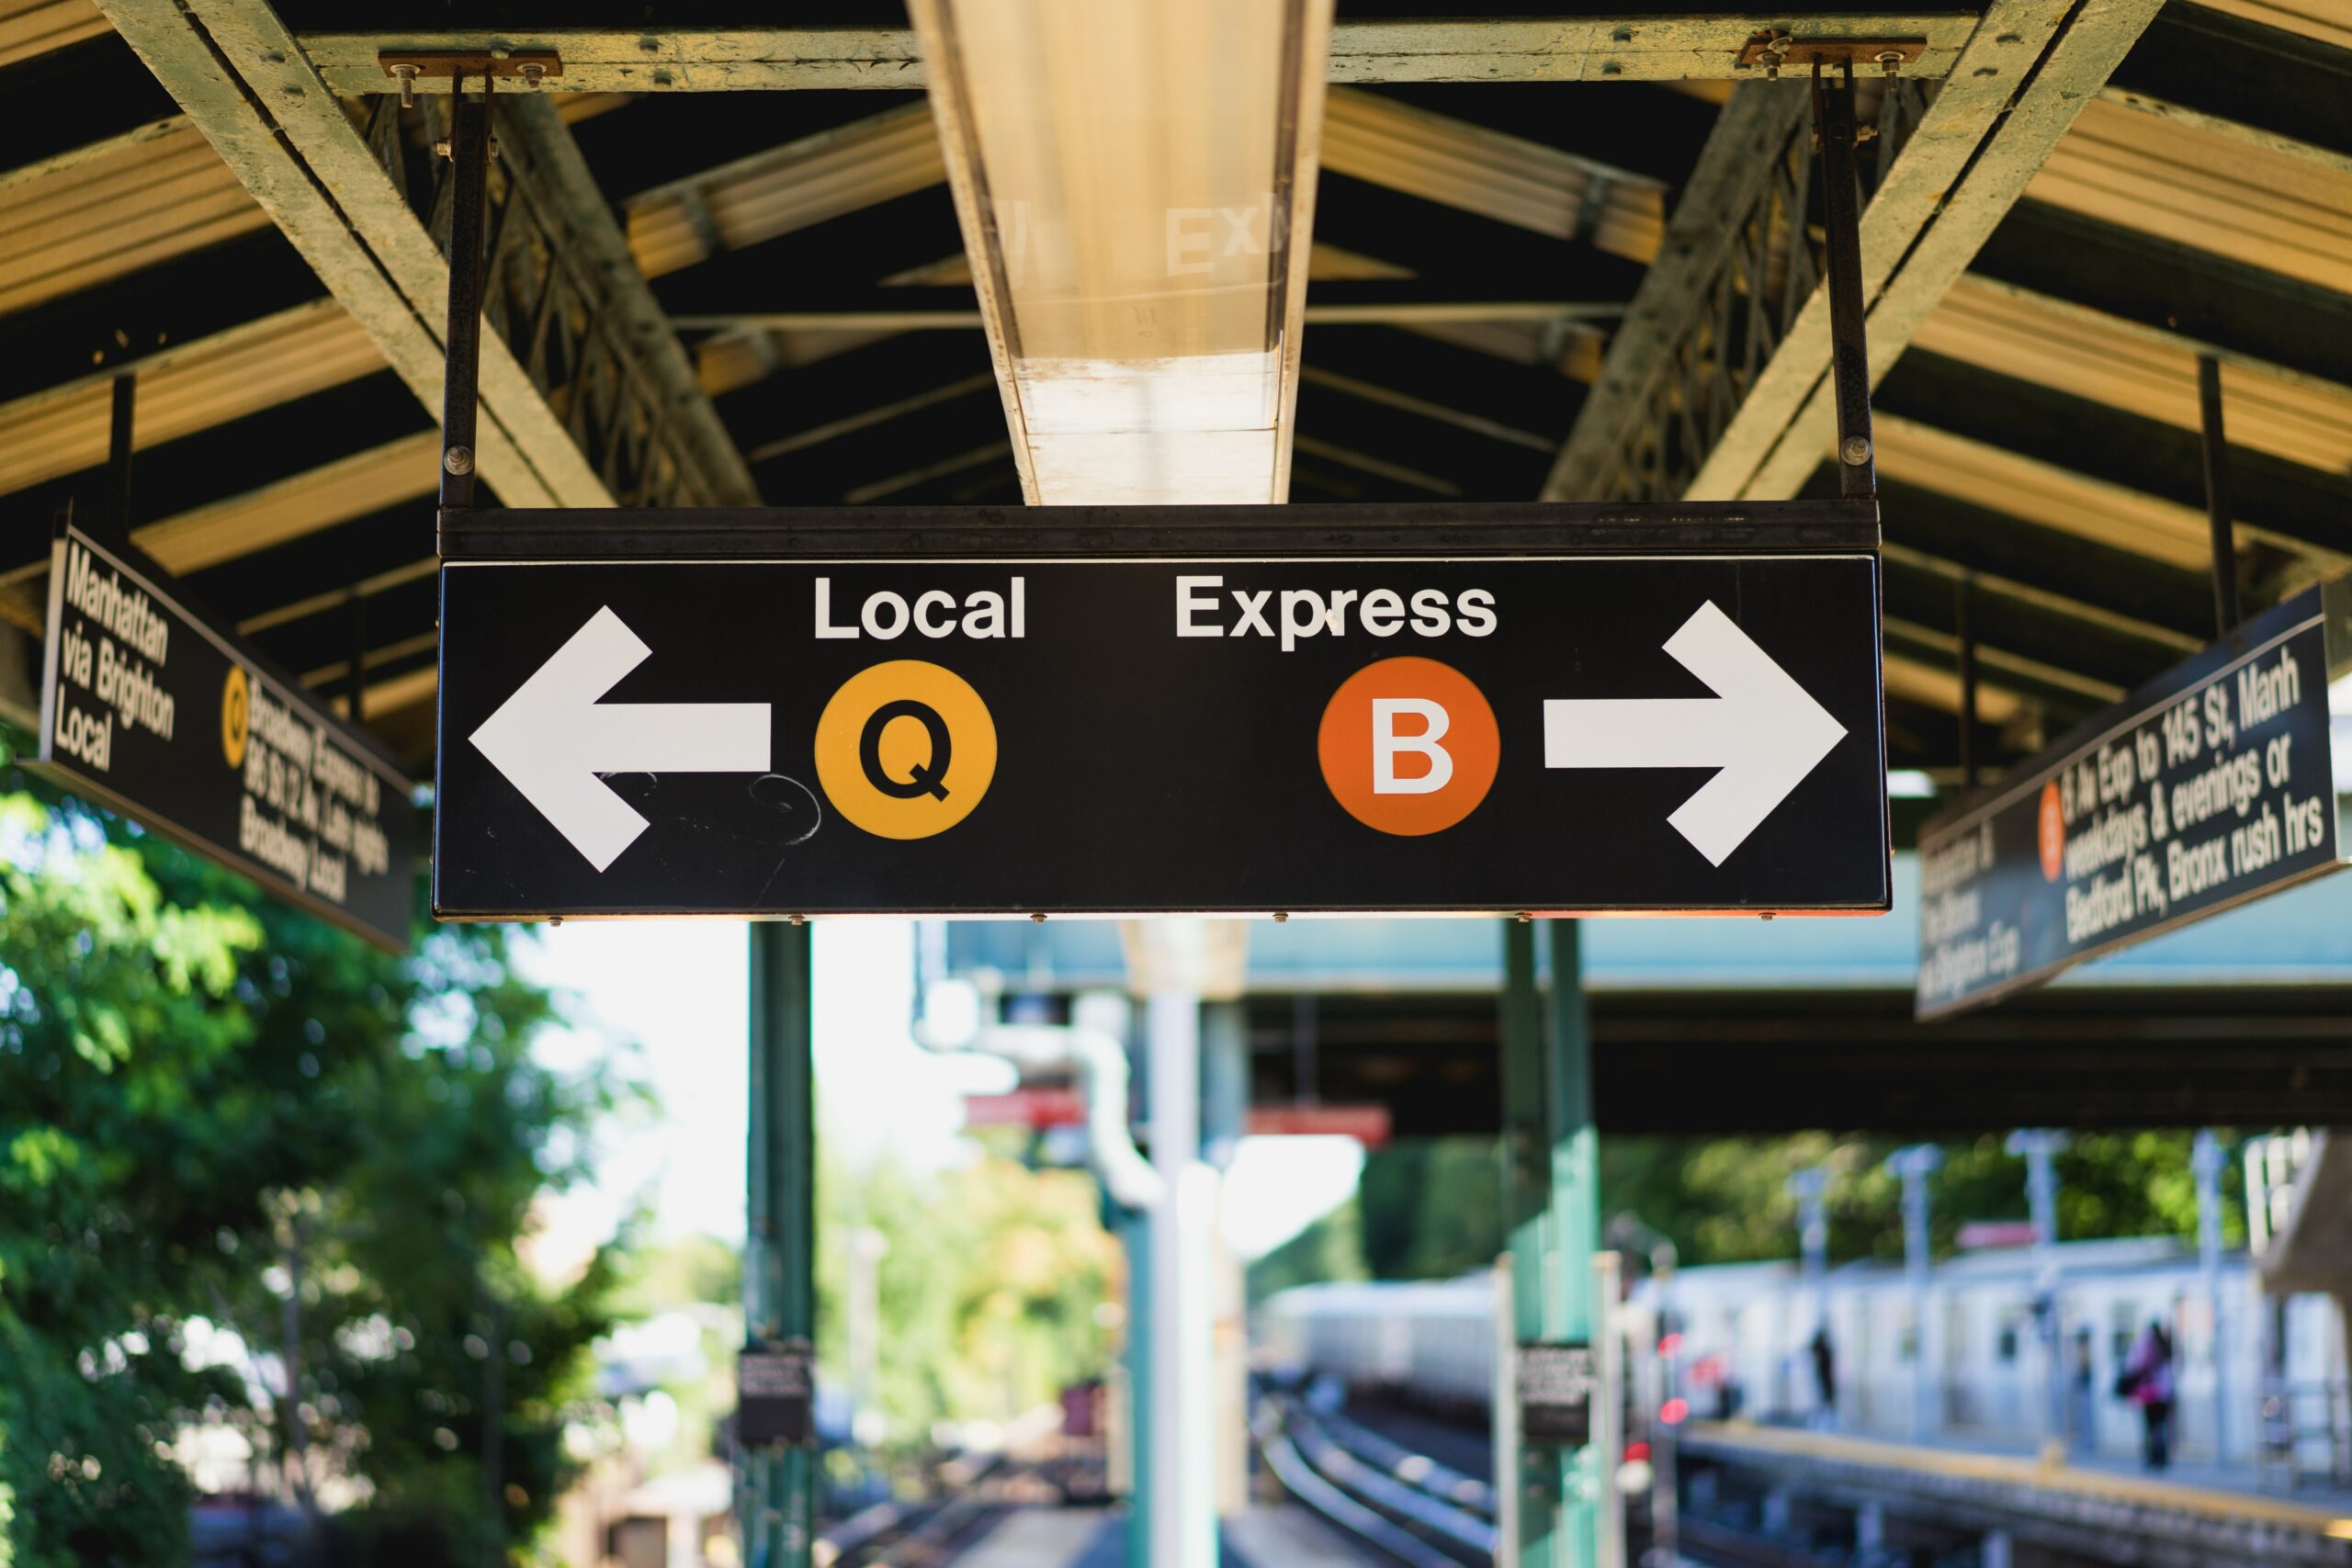 Local and Express station signage